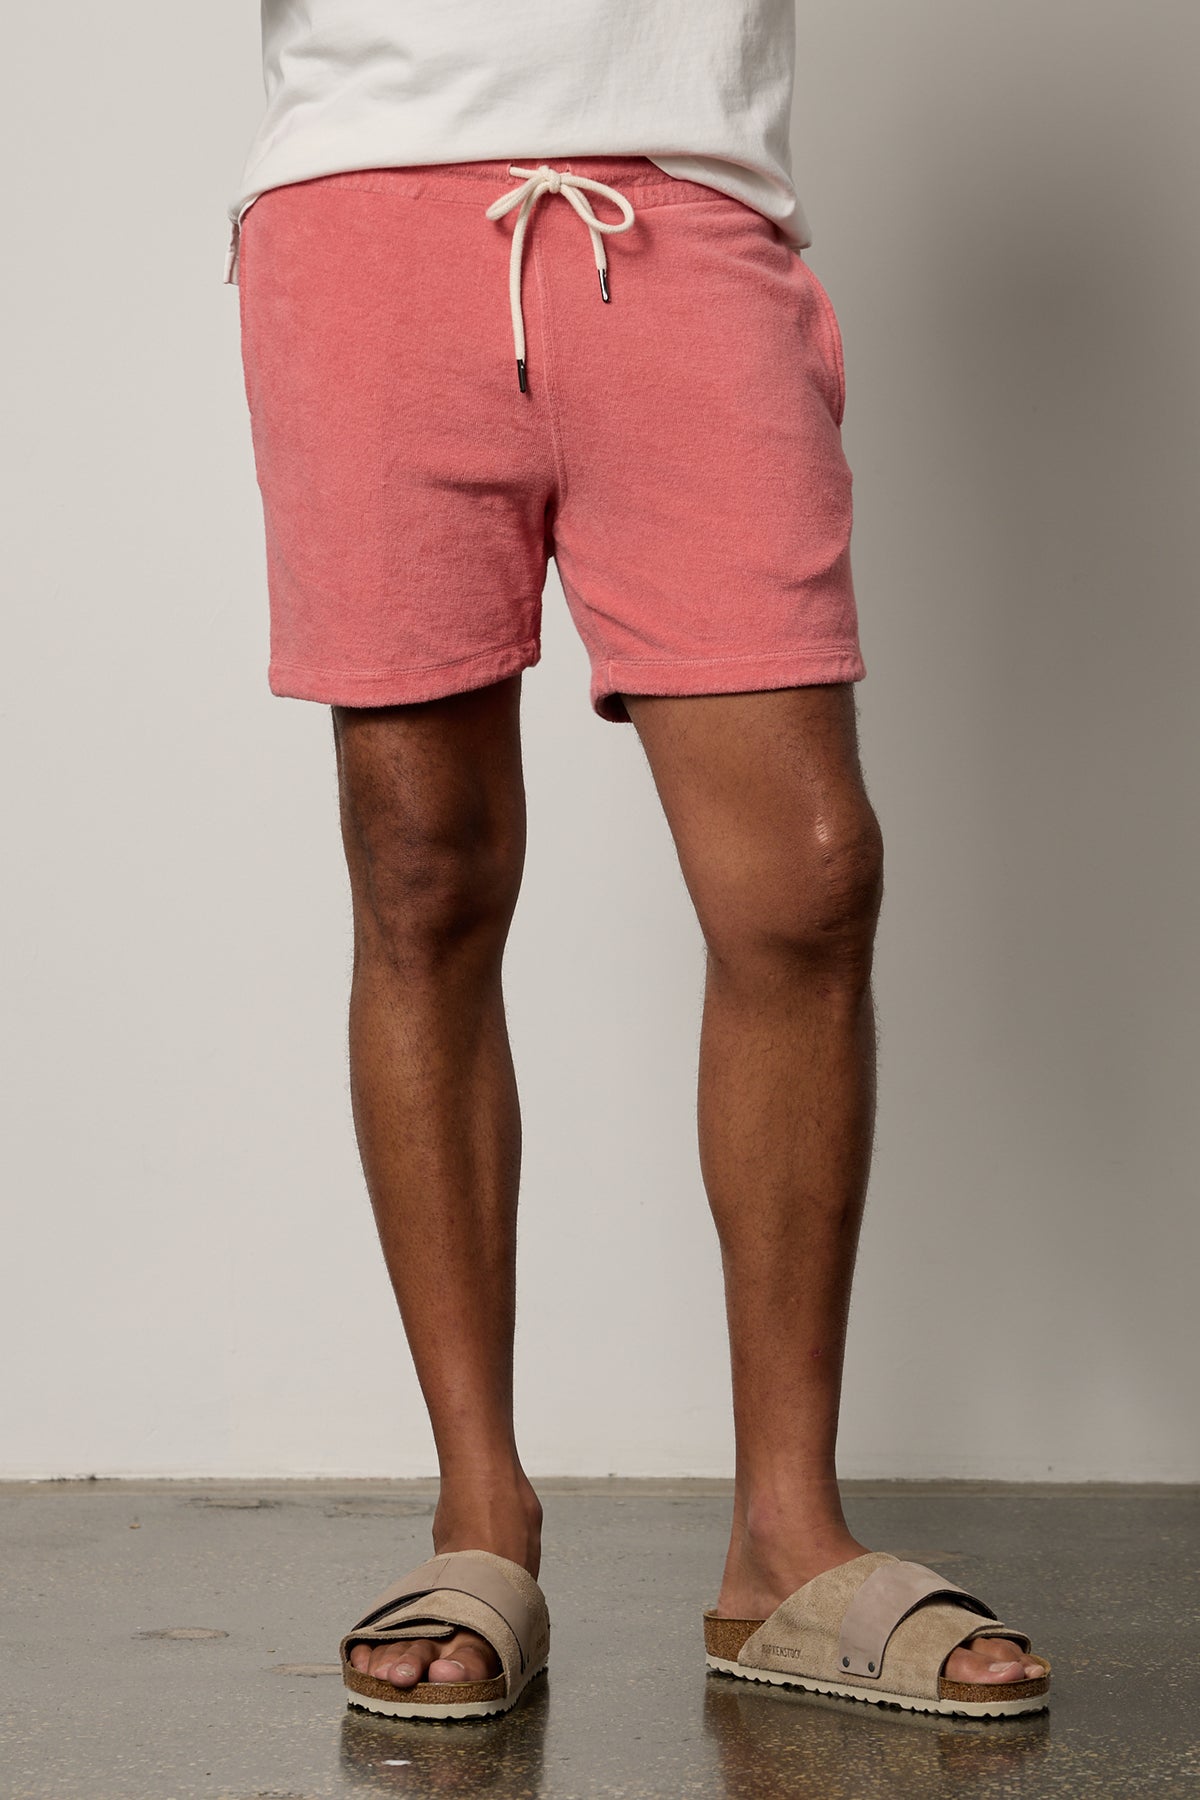 A man wearing OZZIE TERRY SHORT by Velvet by Graham & Spencer shorts and sandals is standing in front of a white wall.-26266333249729